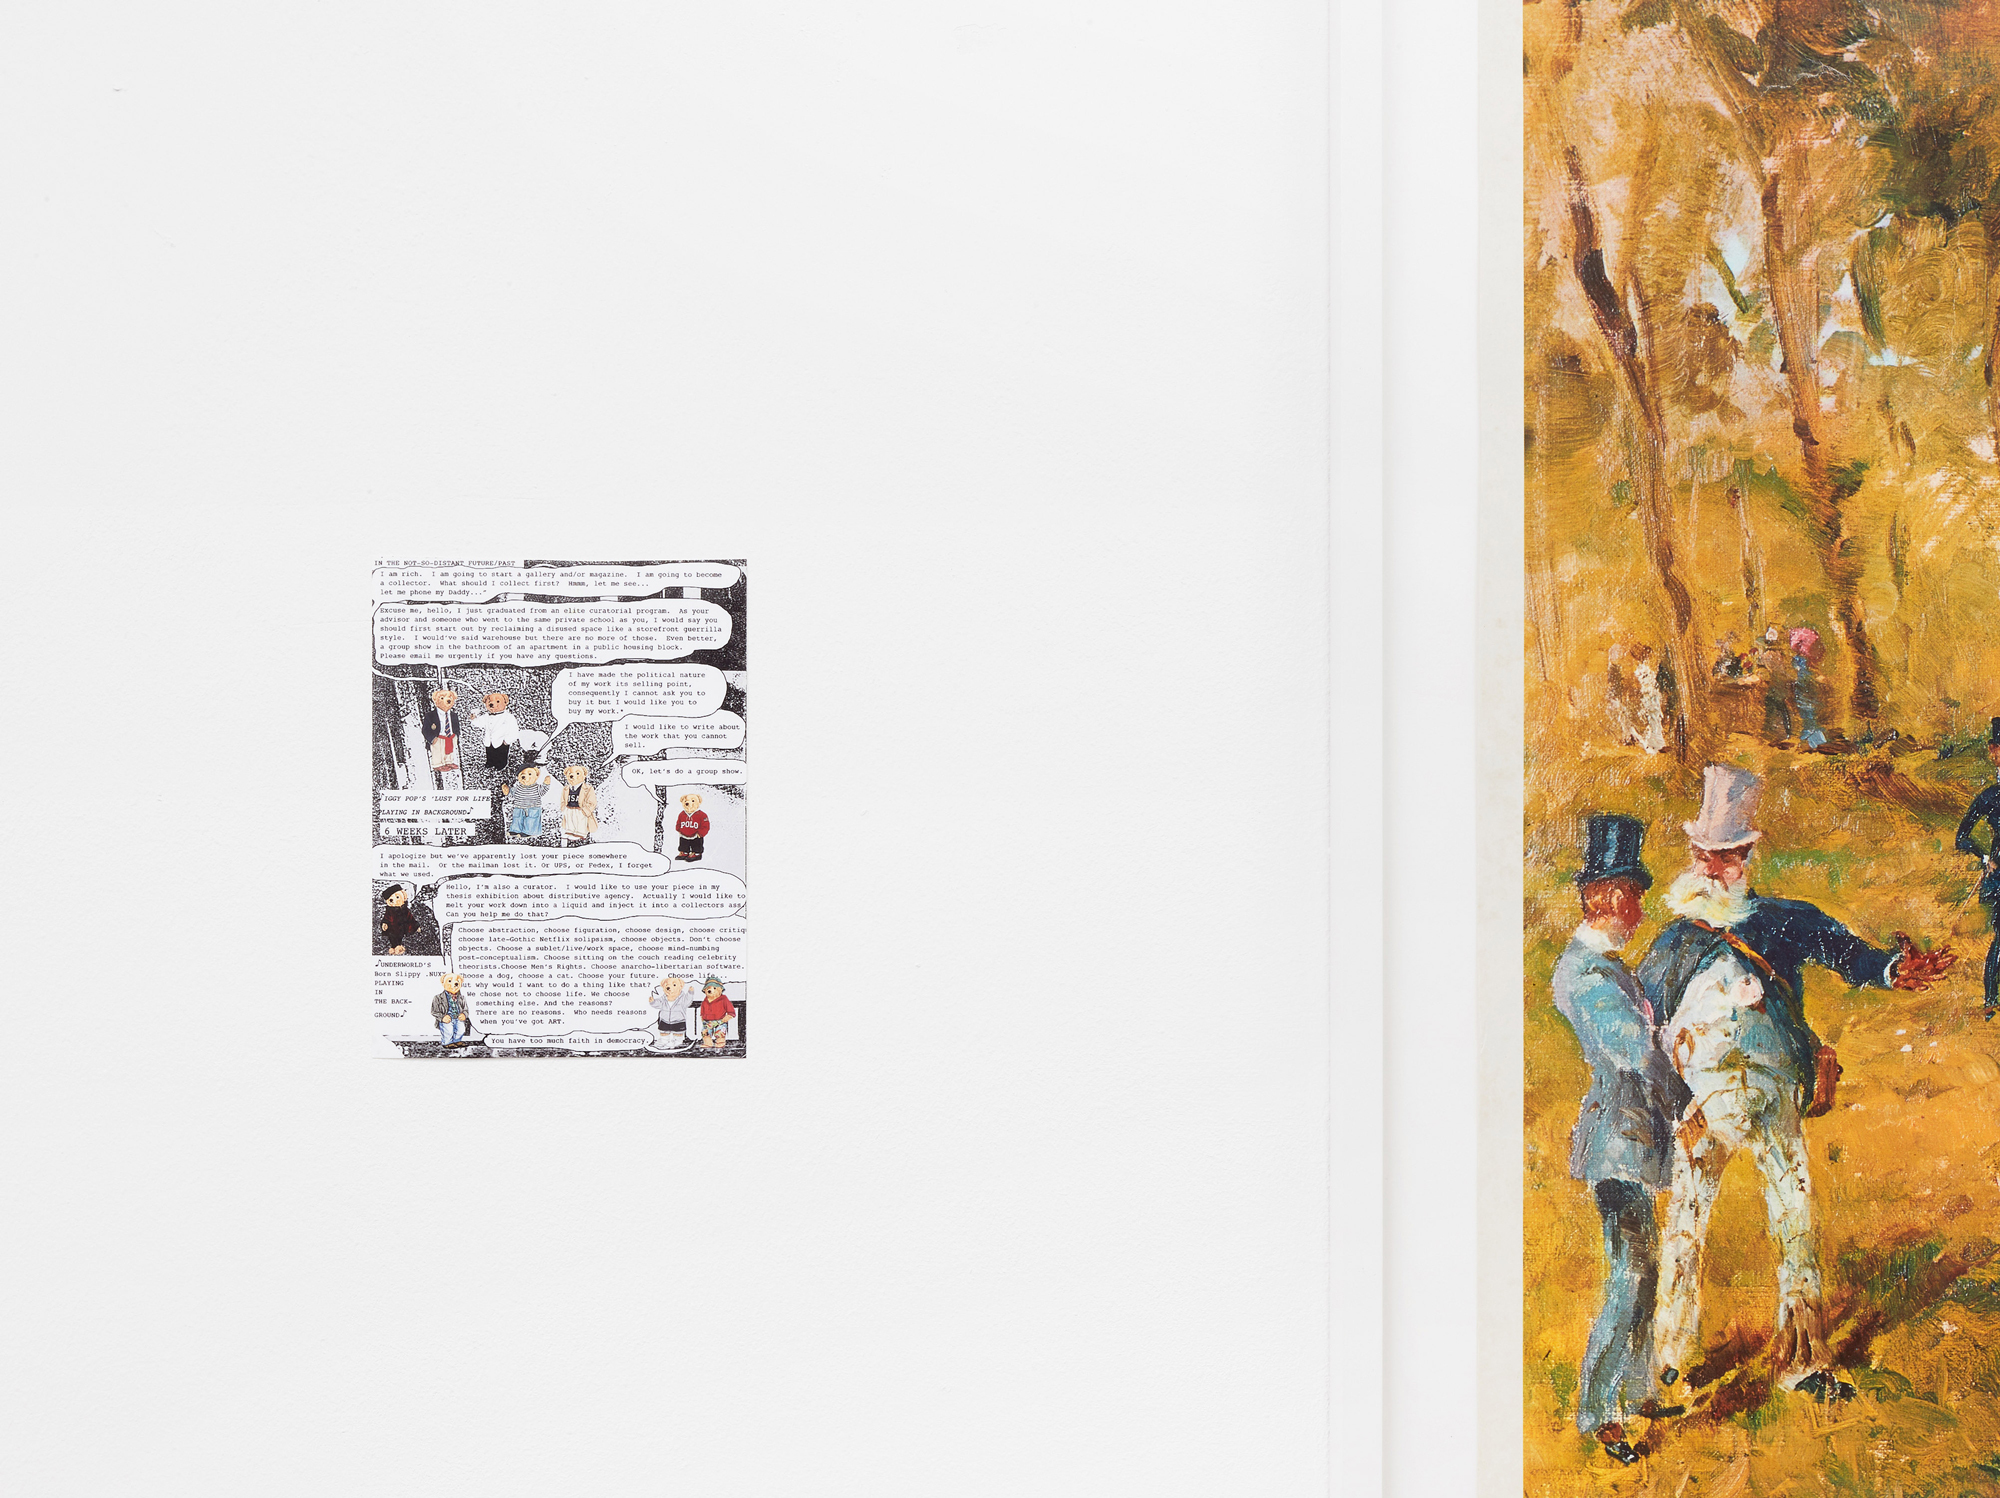 Left: Melissa Sachs und Cameron Soren (Body by Body), reproduction of the invitation card for Freelance Hellraiser, 2014, Interstate Projects, New York, Right: Henri de Toulouse-Lautrec, reproduction Souvenir d'Auteuil (1881), 1967